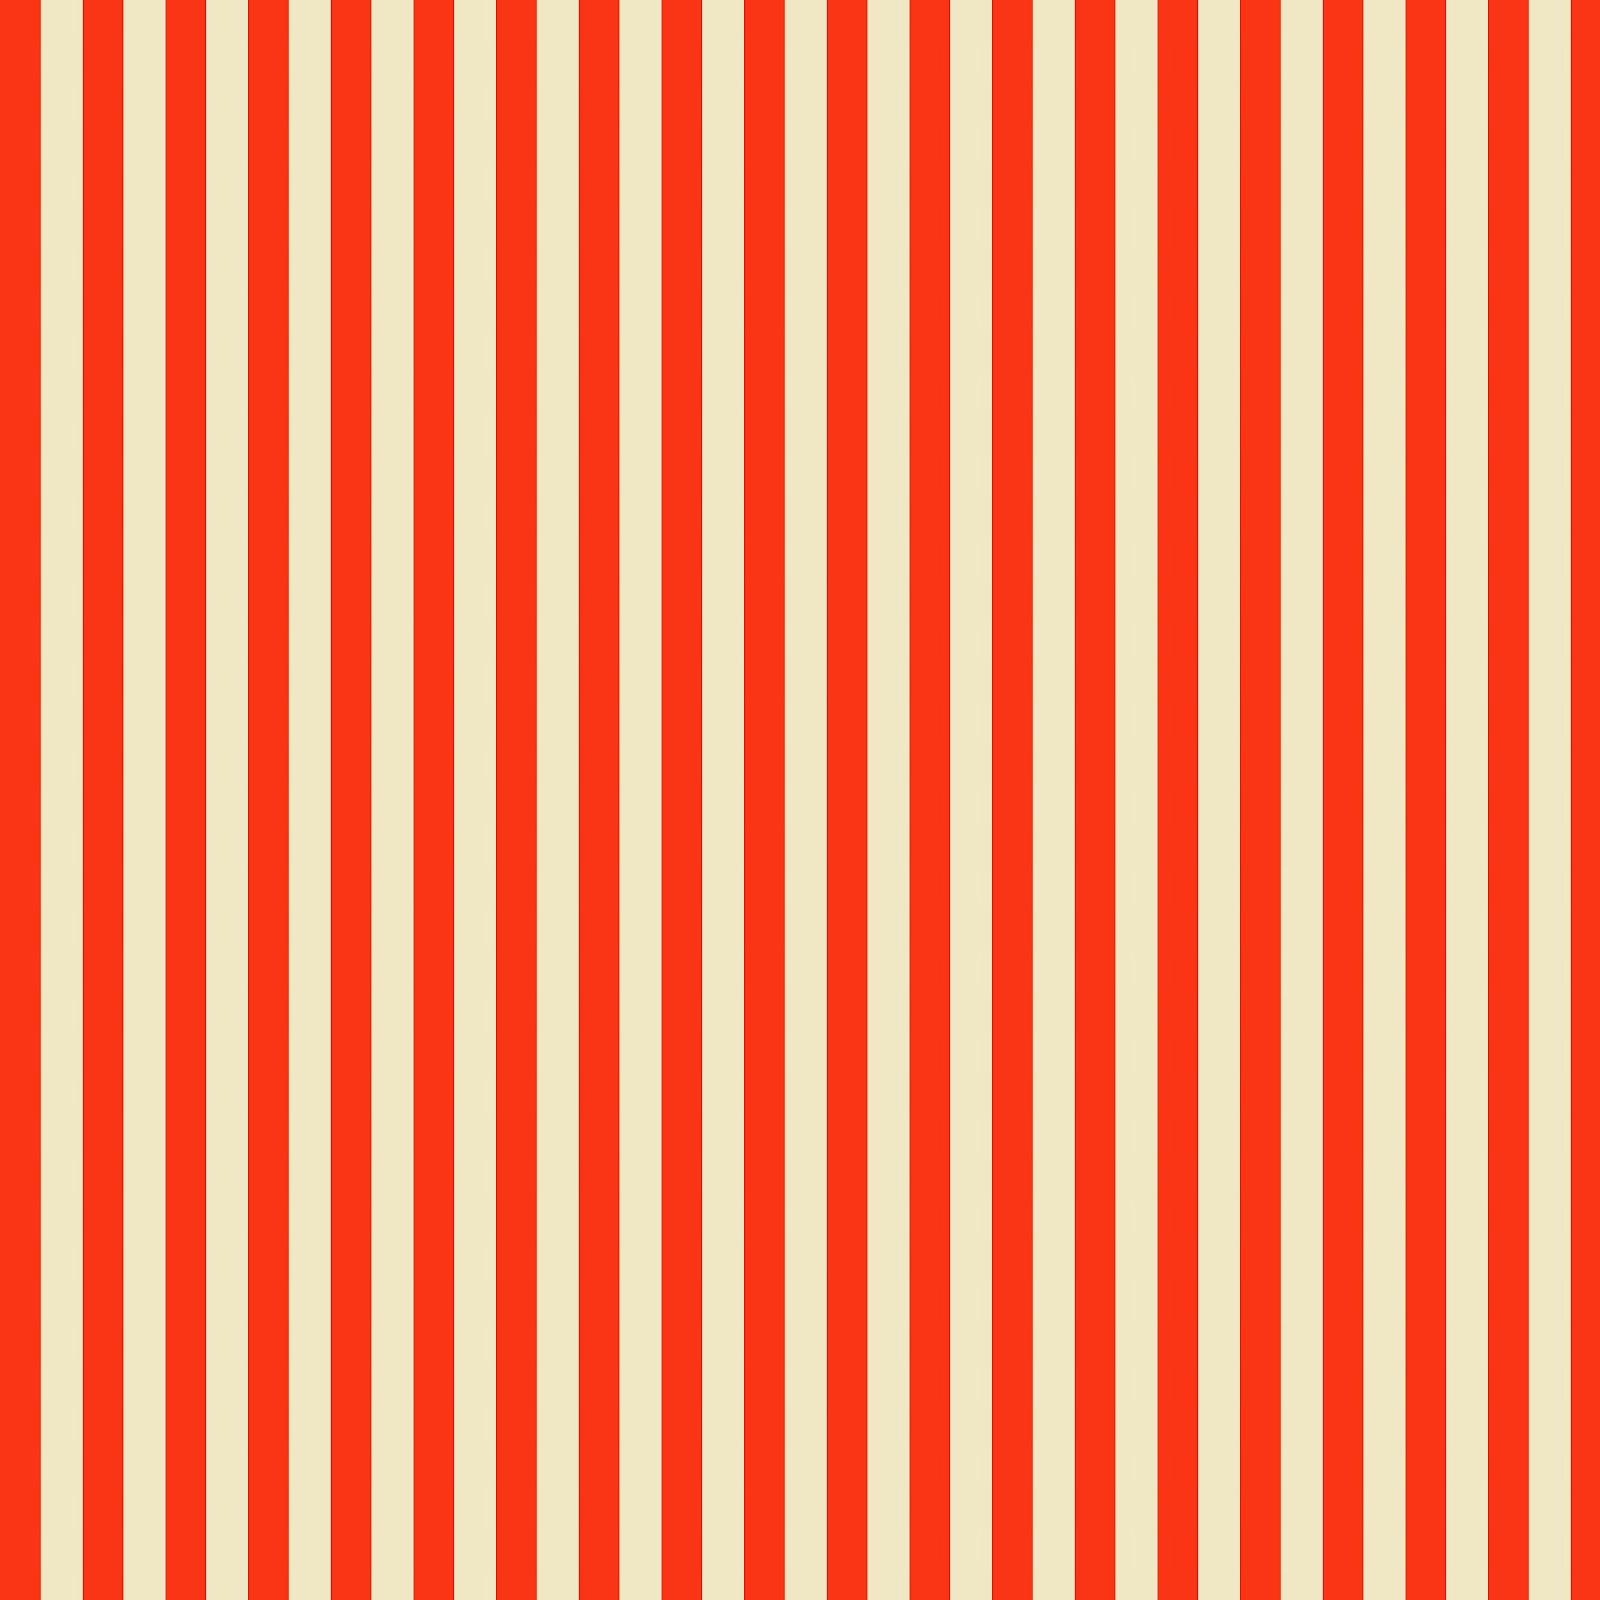 Shop for the Red Stripe Paper by Recollections at Michaels